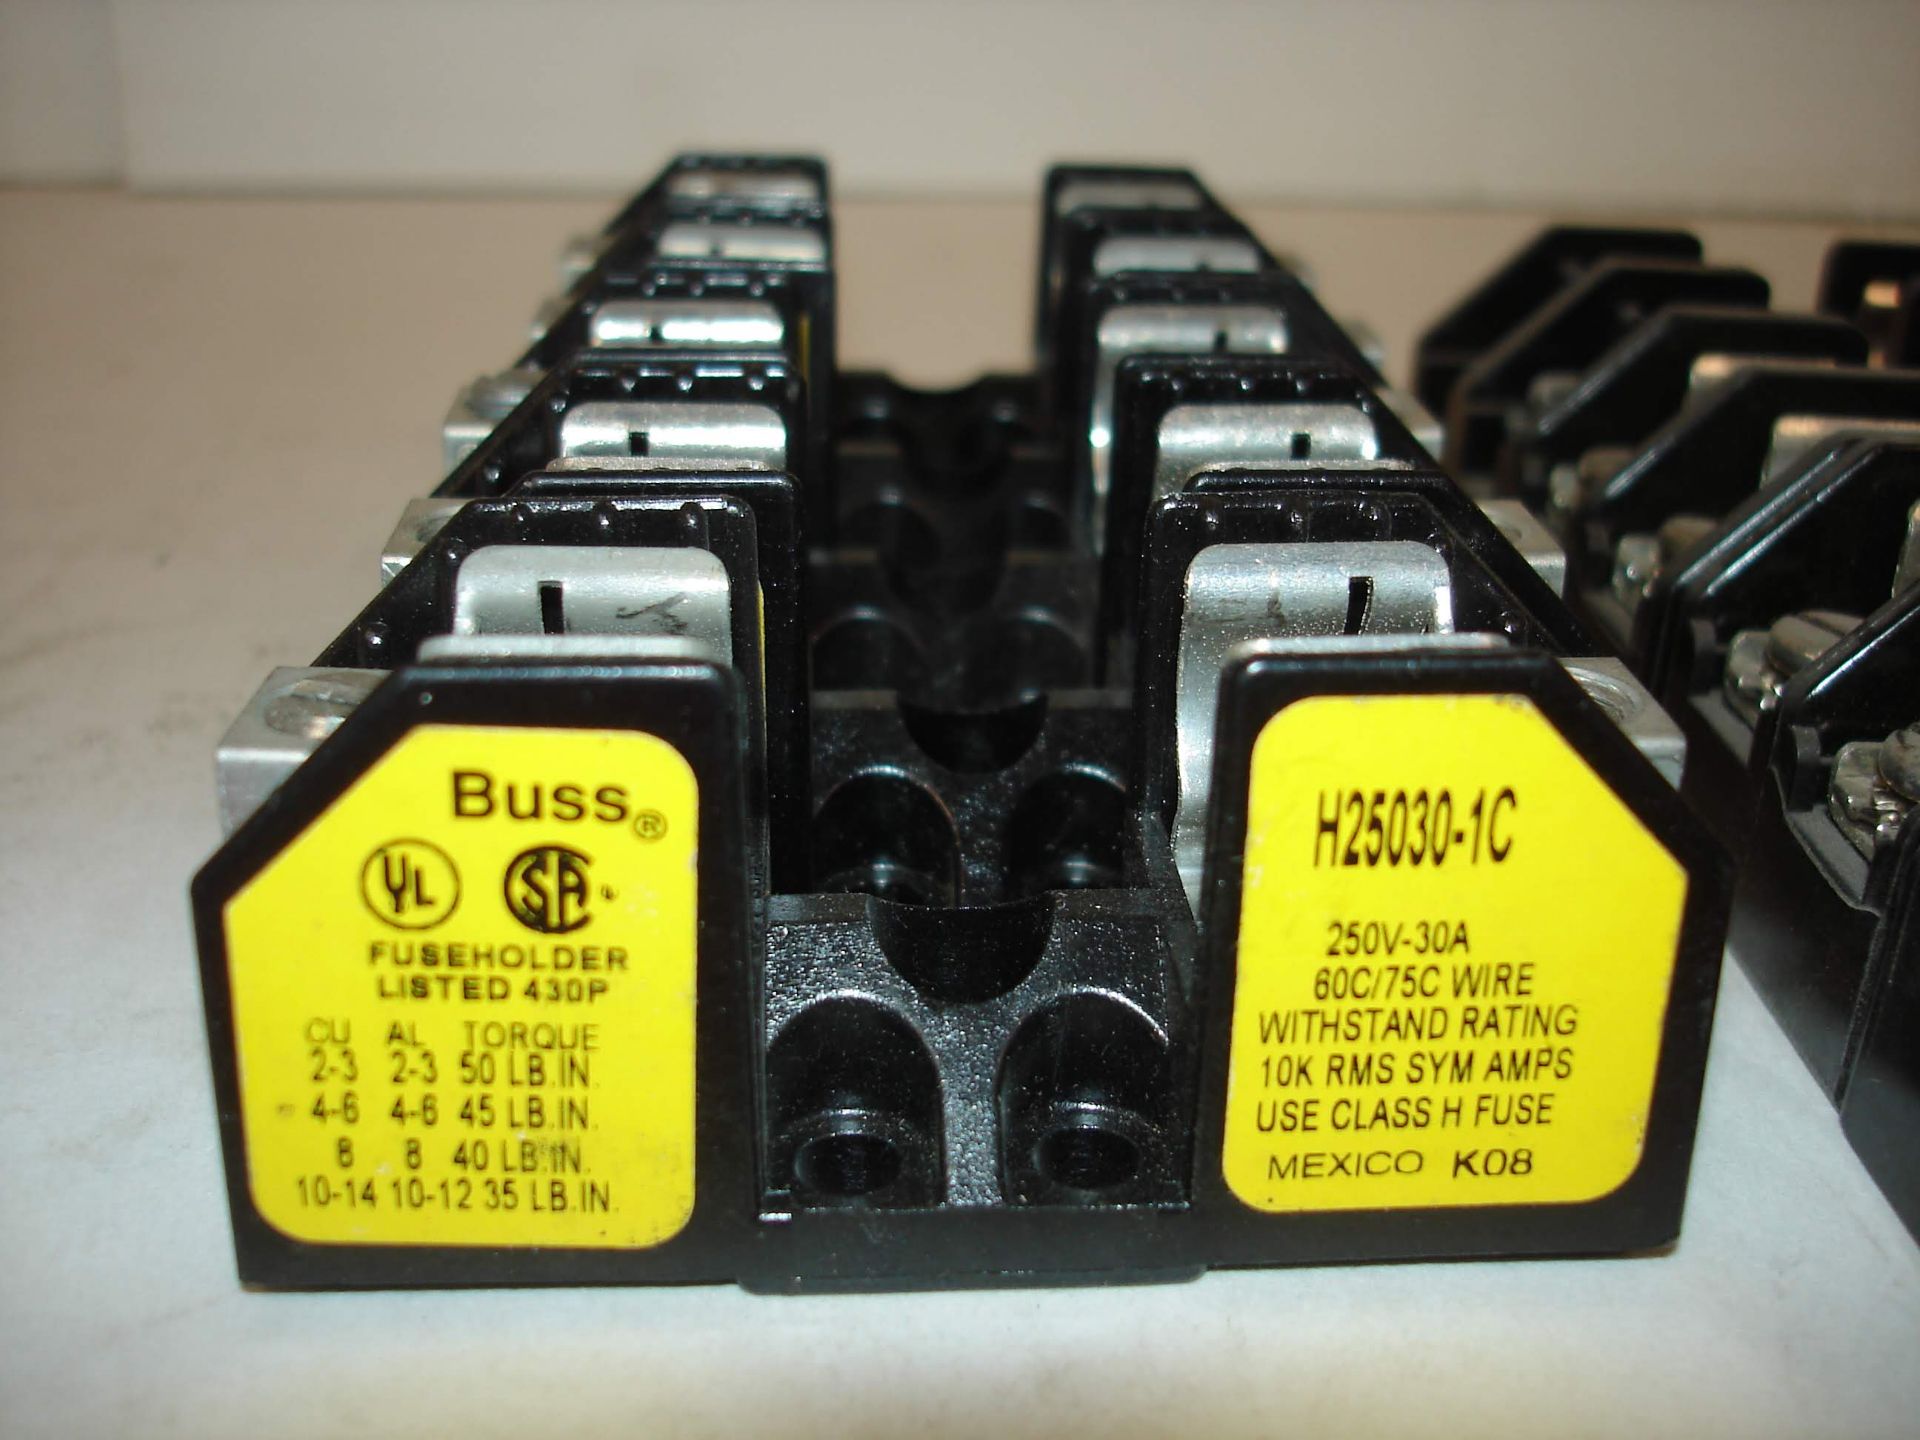 (30+) MISC BRANDED FUSE BLOCKS AND FUSE HOLDERS: BUSSMANN H25030-1C AND ALL OTHER ITEMS INCLUDED - Image 6 of 10